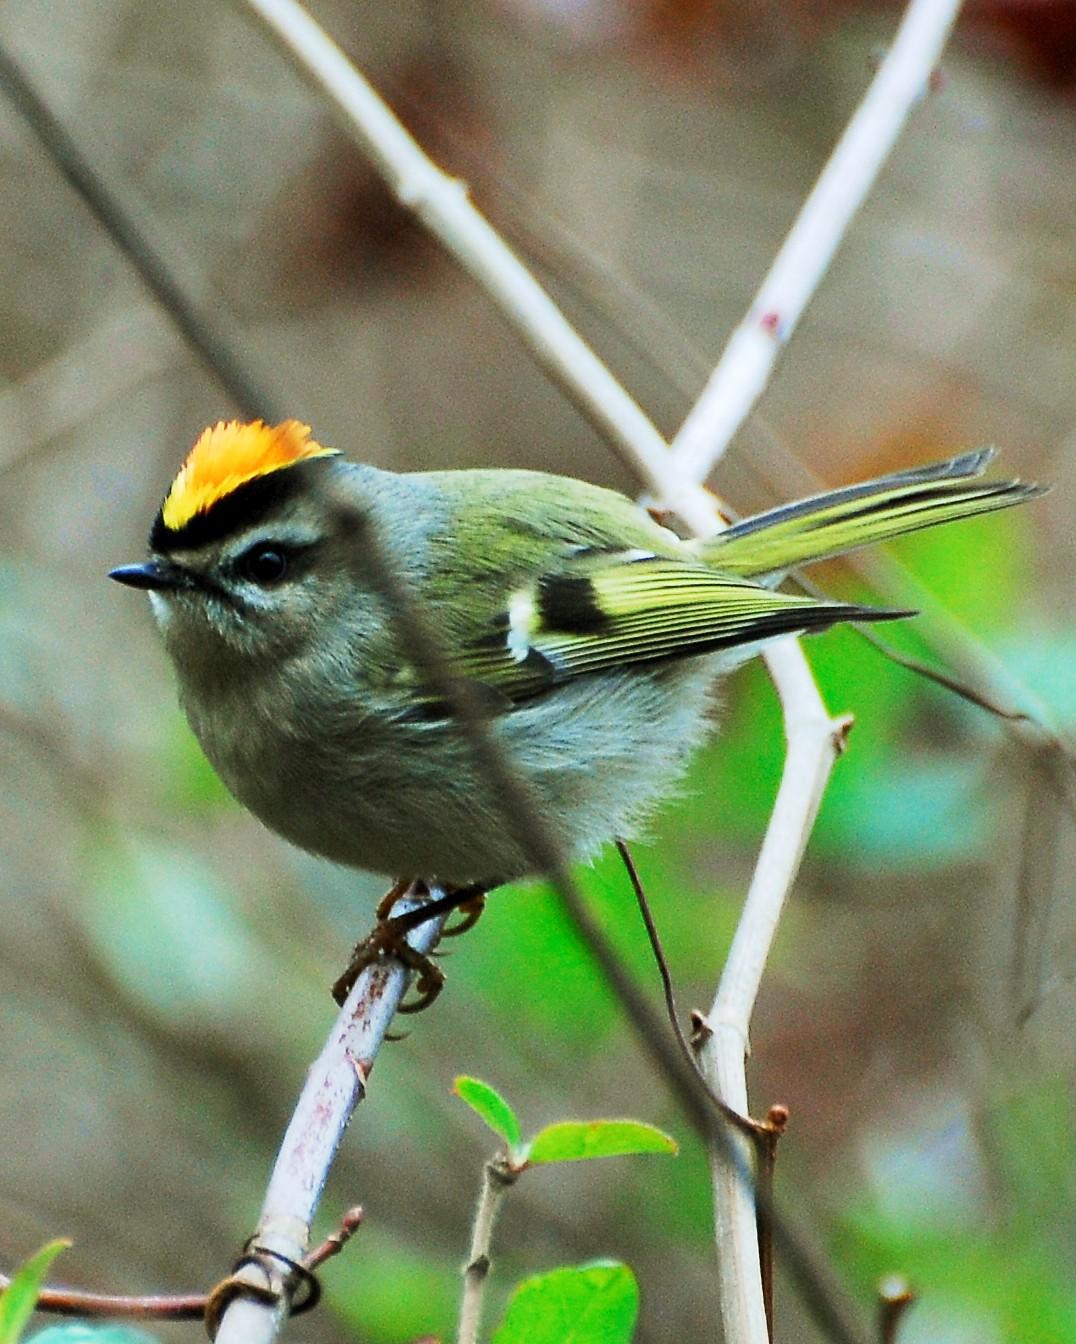 Golden-crowned Kinglet Photo by David Hollie